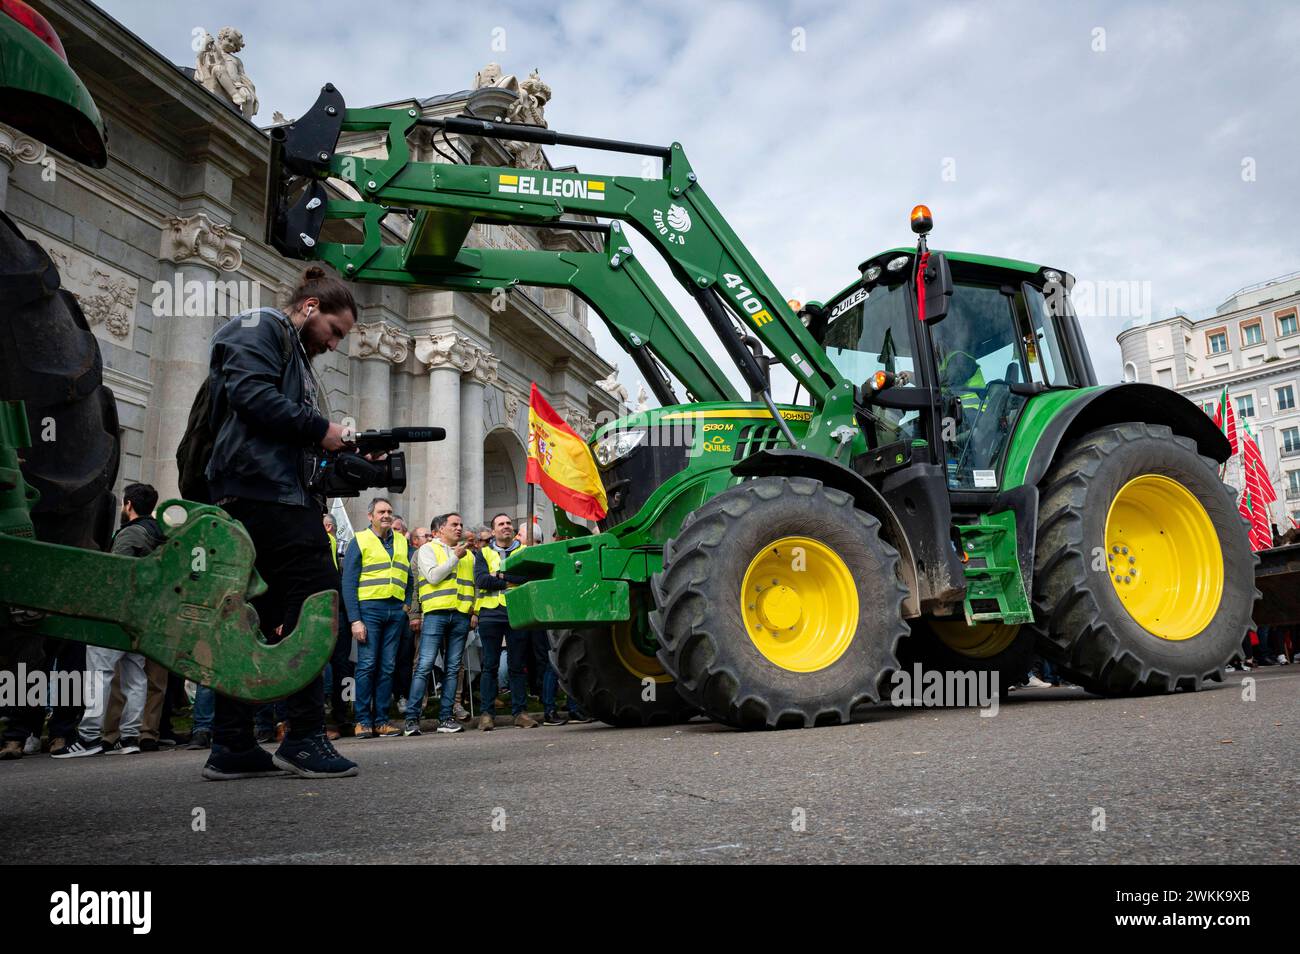 Spanish farmer demonstration in Madrid A tractor seen during the farmers demonstration in Puerta de Alcala in Madrid the protest, organized by Spanish trade unions, is focused on concerns over unfair competition from products originating outside the EU. Farmers are also unhappy about the meager profits derived from their crops and are critical of EU agricultural policy. Madrid Puerta de Alcala Madrid Spain Copyright: xAlbertoxGardinx AGardin 20240221 manifestacion tractores madrid 058 Stock Photo